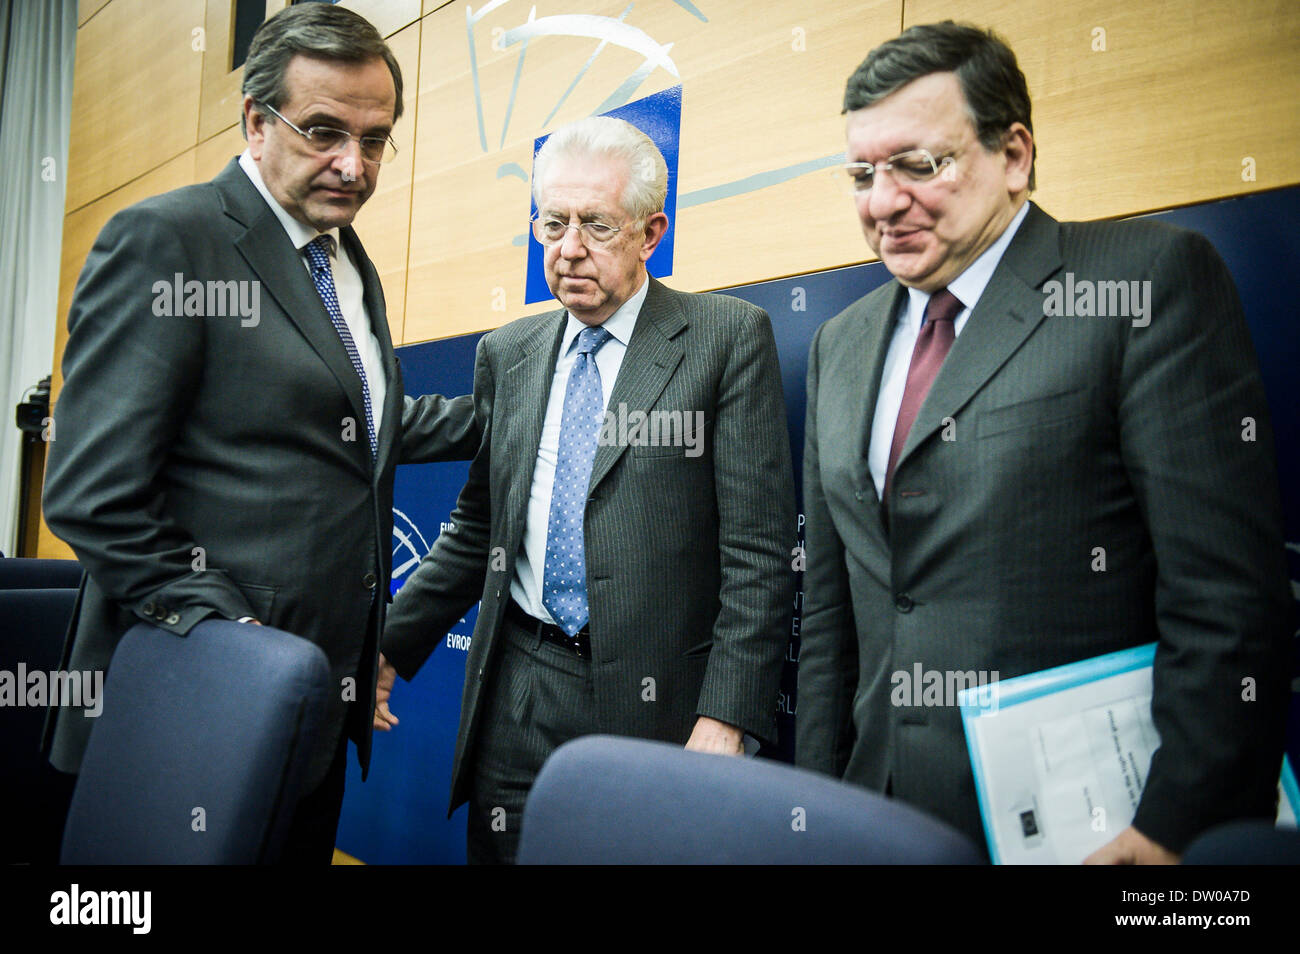 Strasbourg, France. 25th Feb, 2014. Senator Mario MONTI, designated Chair of the High Level Group on Own Resources (C ) Jose Manuel Barroso, the president of the European Commission (R ) and Antonis SAMARAS, Prime Minister of Greece leave the press room after conference to announce the establishment of the High Level Group on Own Resources at European Parliament headquarters in Strasbourg, France on 25.02.2014 Credit:  Wiktor Dabkowski/ZUMAPRESS.com/Alamy Live News Stock Photo